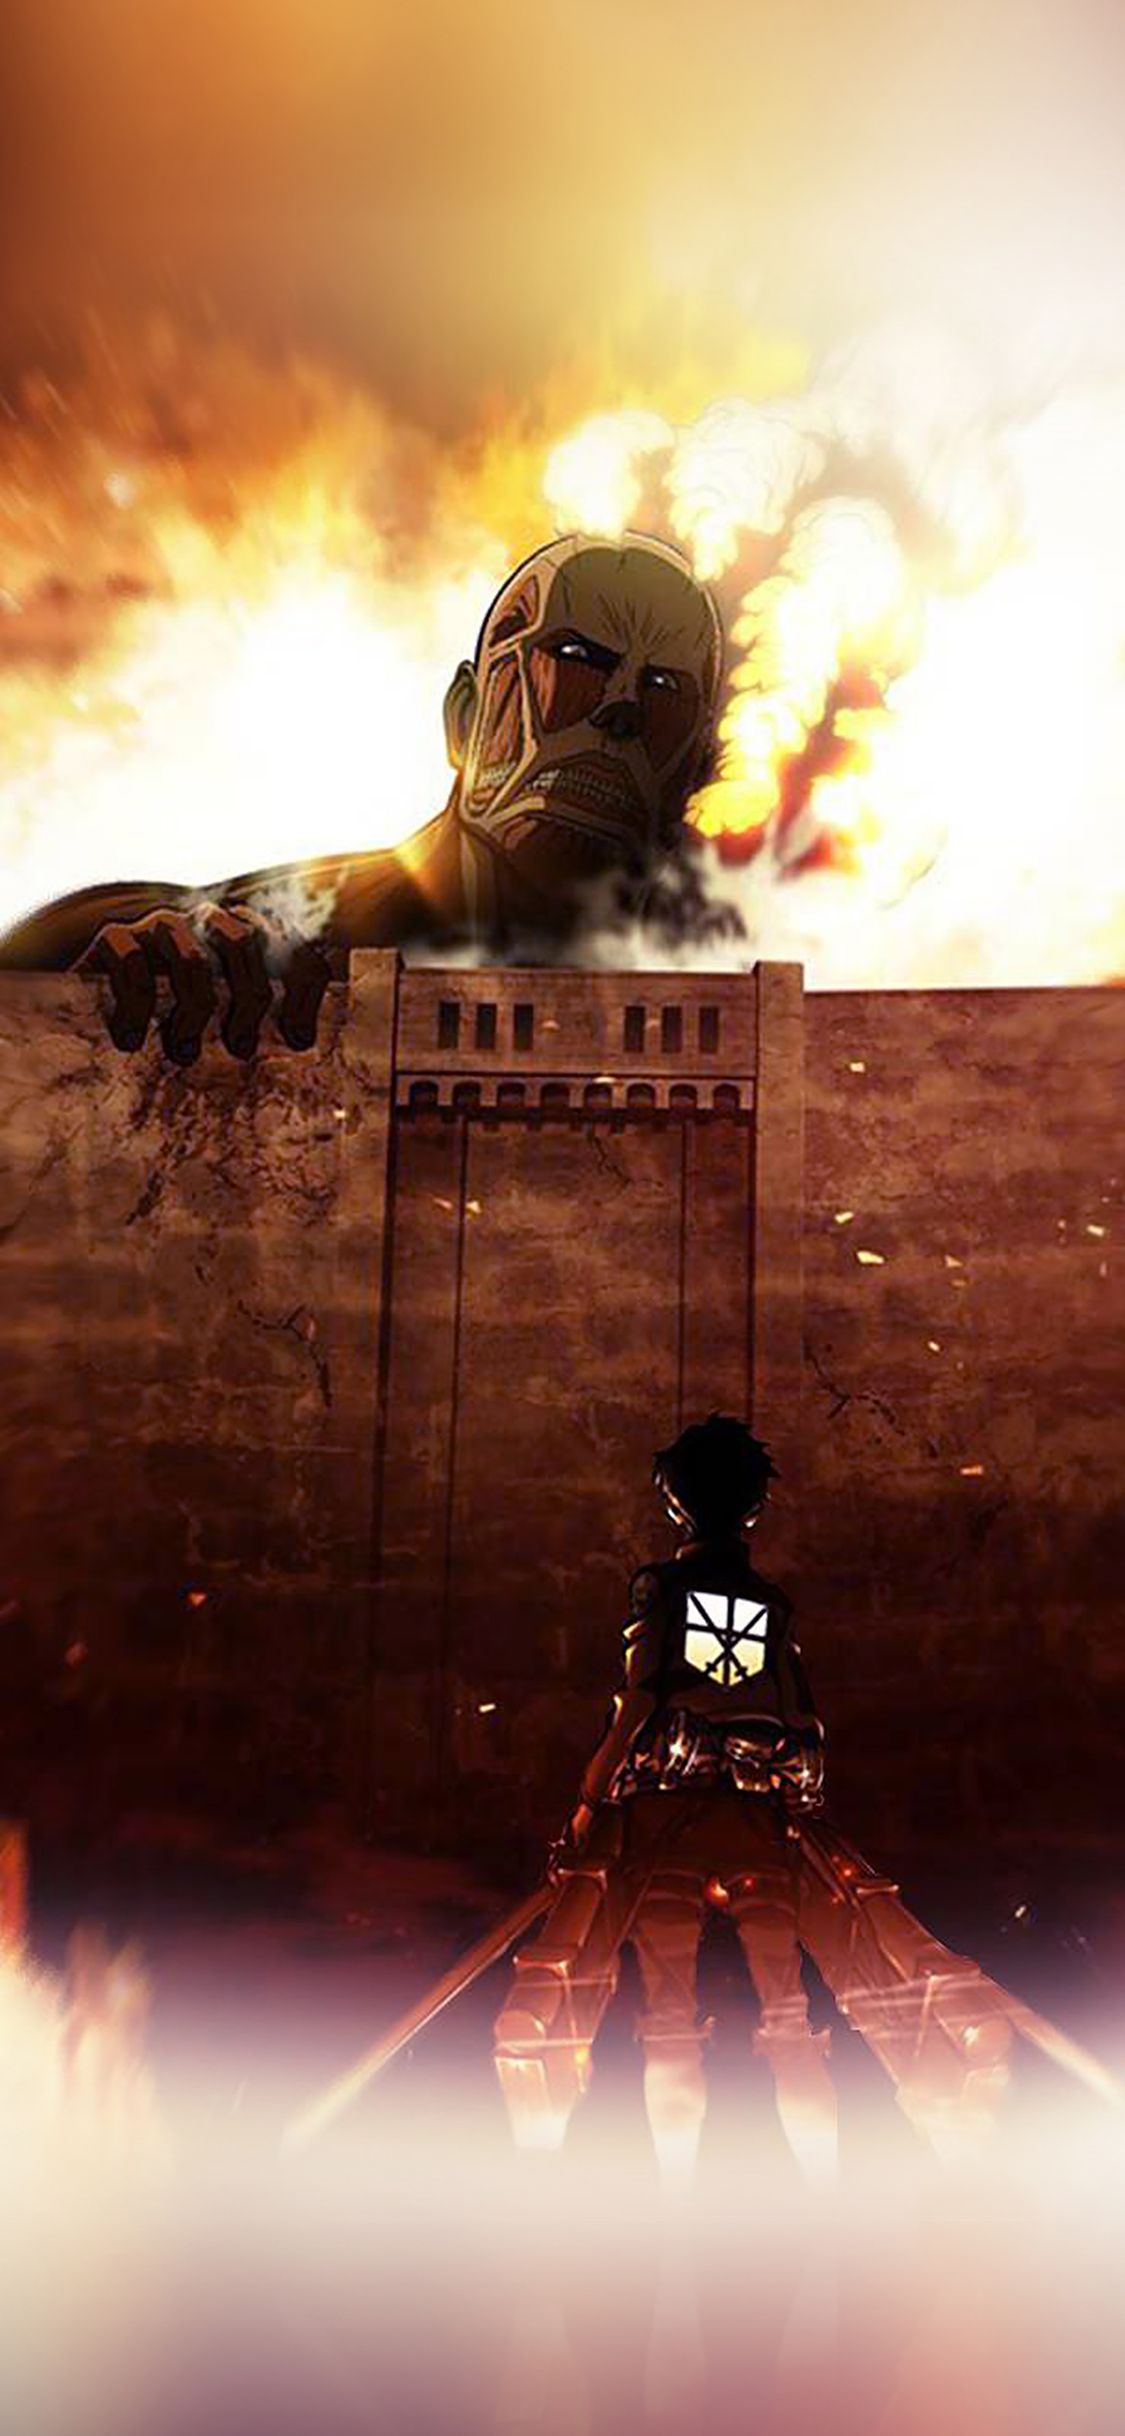 Android Attack On Titan Wallpapers - Wallpaper Cave